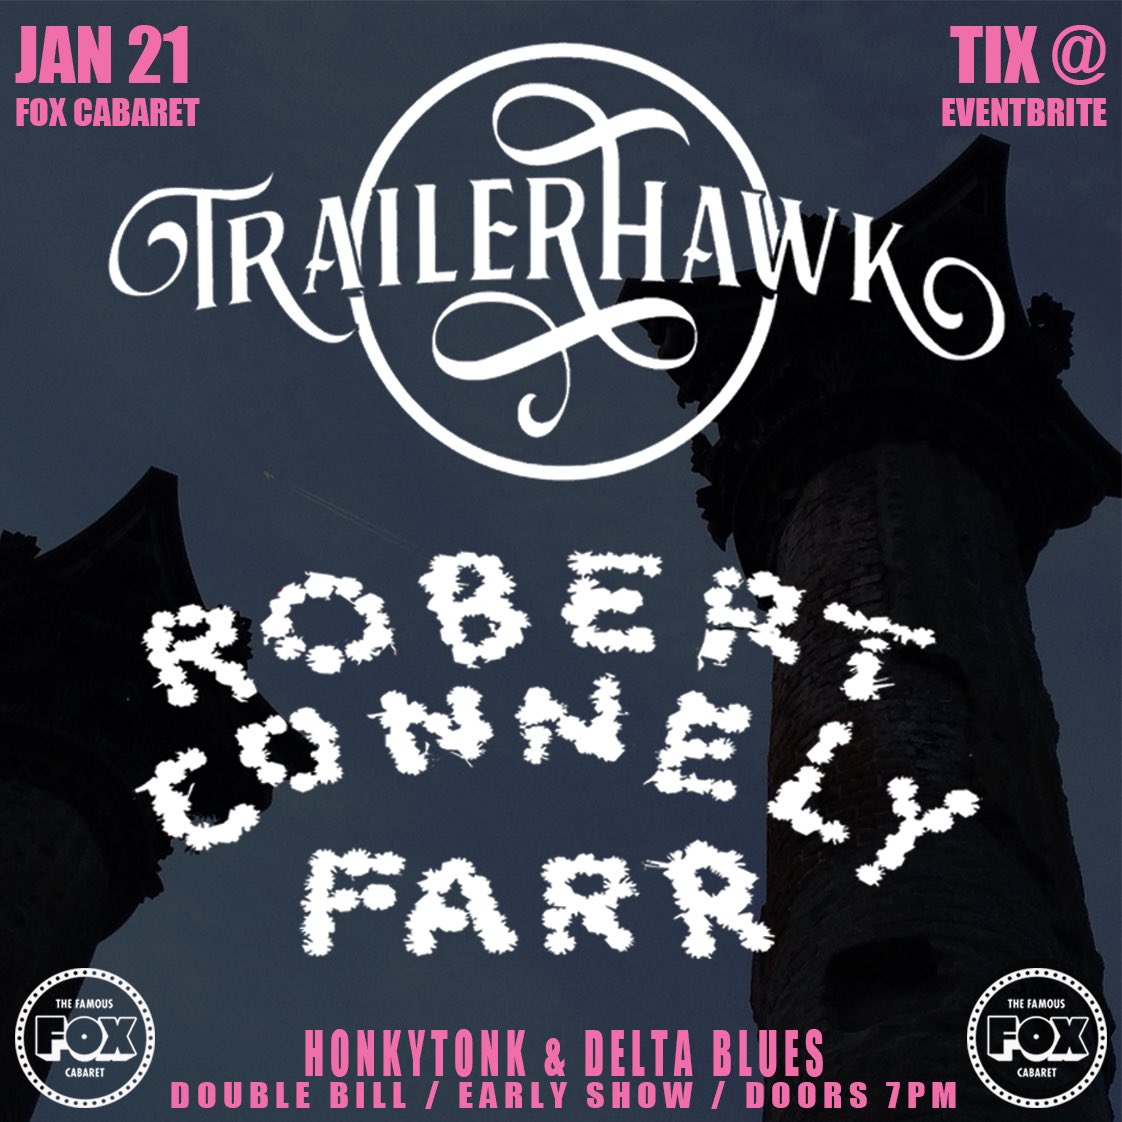 next show is January 21 @FoxCabaret w/ our good friends @trailerhawk tix 👇 eventbrite.com/e/trailerhawk-… #DeltaBlues #HonkyTonk #BentoniaBlues #CountryBlues #HillCountry #DirtySouthBlues #Mississippi